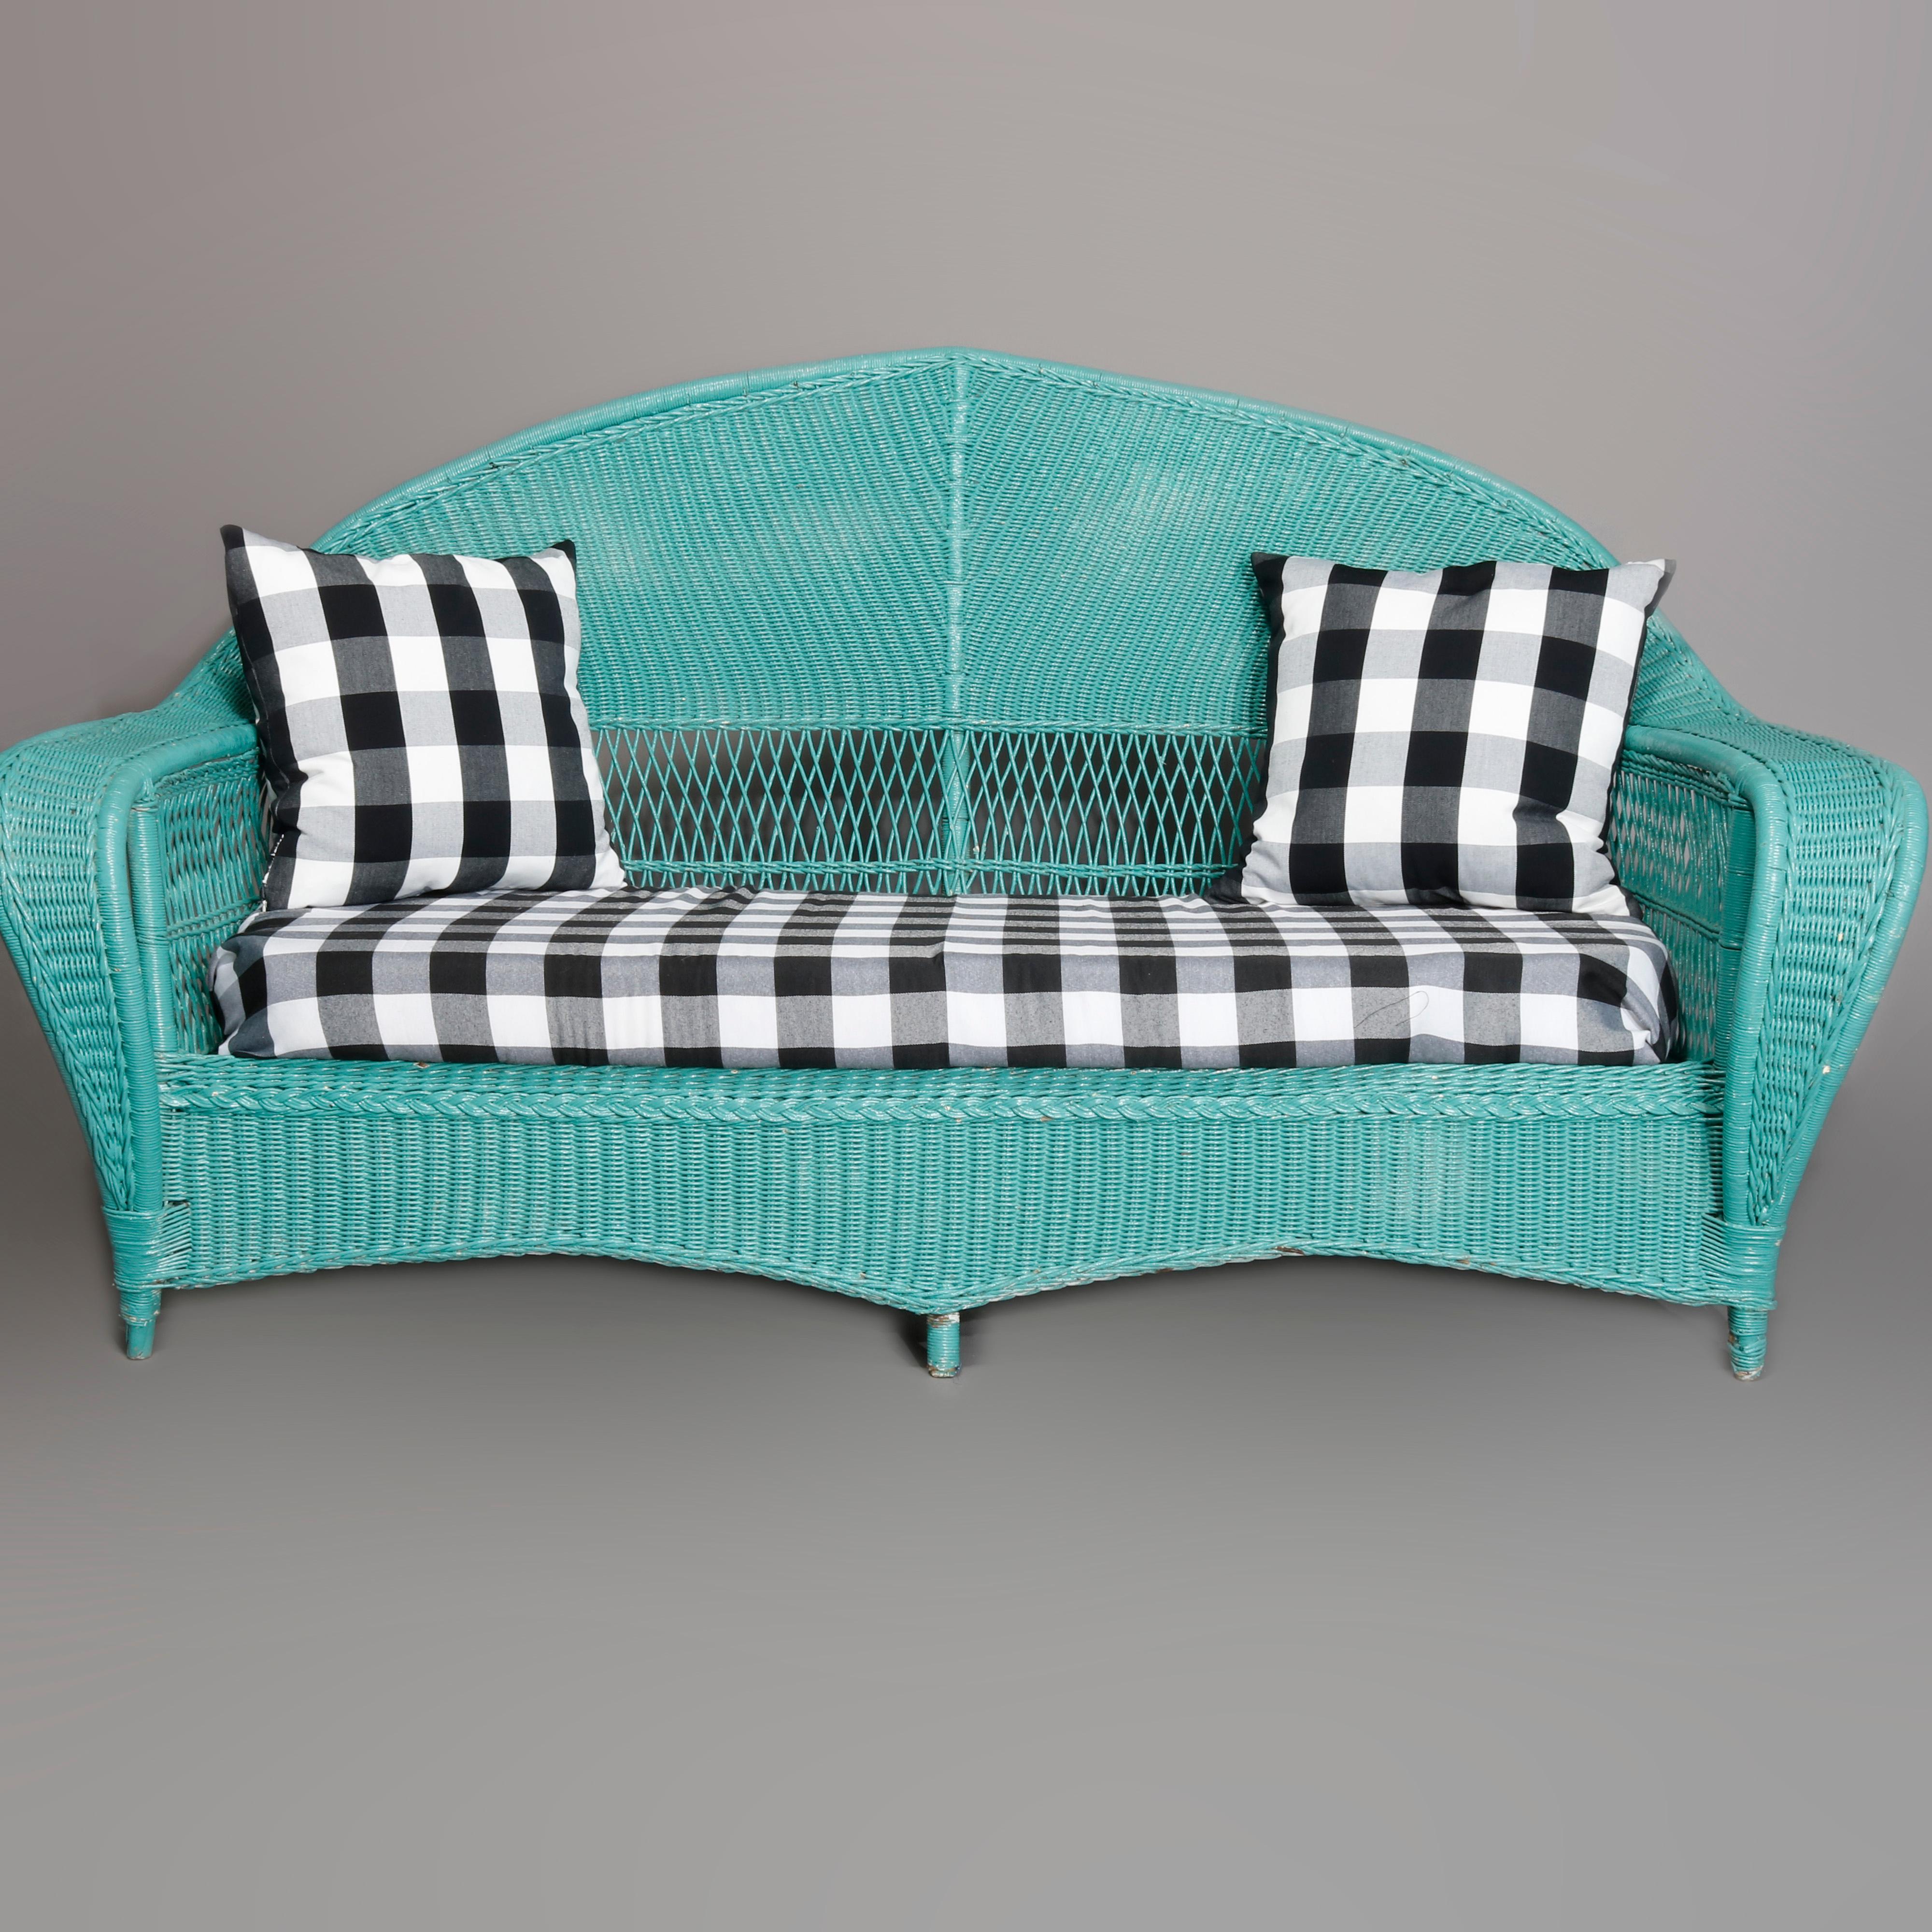 Antique Art Deco seating set by Heywood Wakefield offers turquoise blue painted wicker construction with arched backs and oversized waterfall form arms, having black and white checked upholstered seats, 20th century.

Measures: Settee- 39